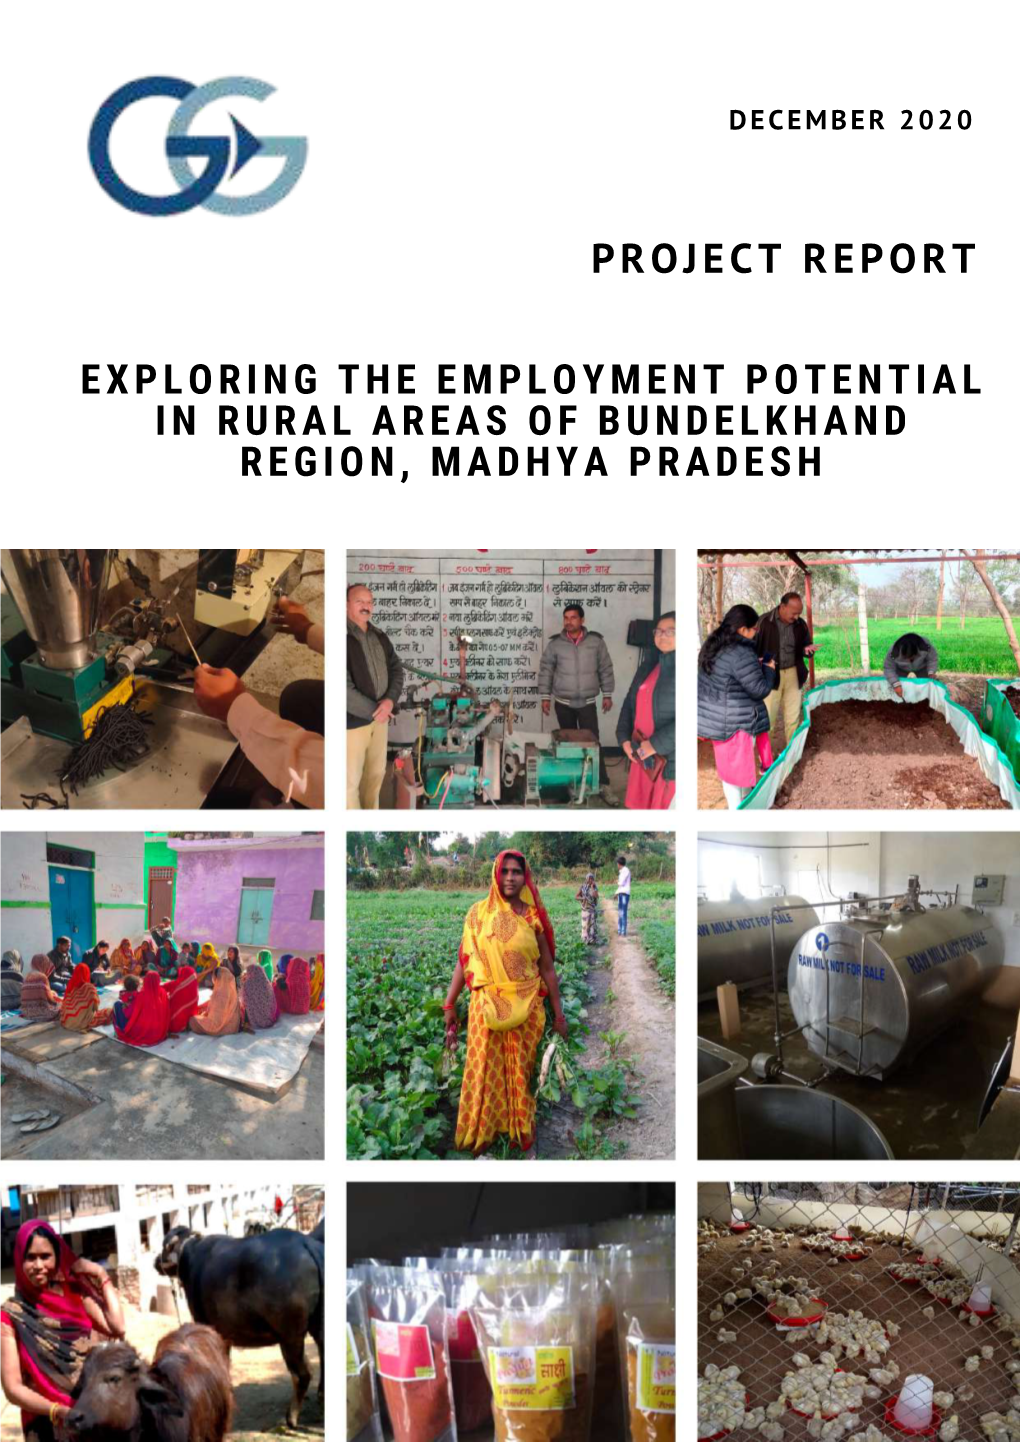 Exploring the Employment Potential in Rural Areas of Bundelkhand Region, Madhya Pradesh